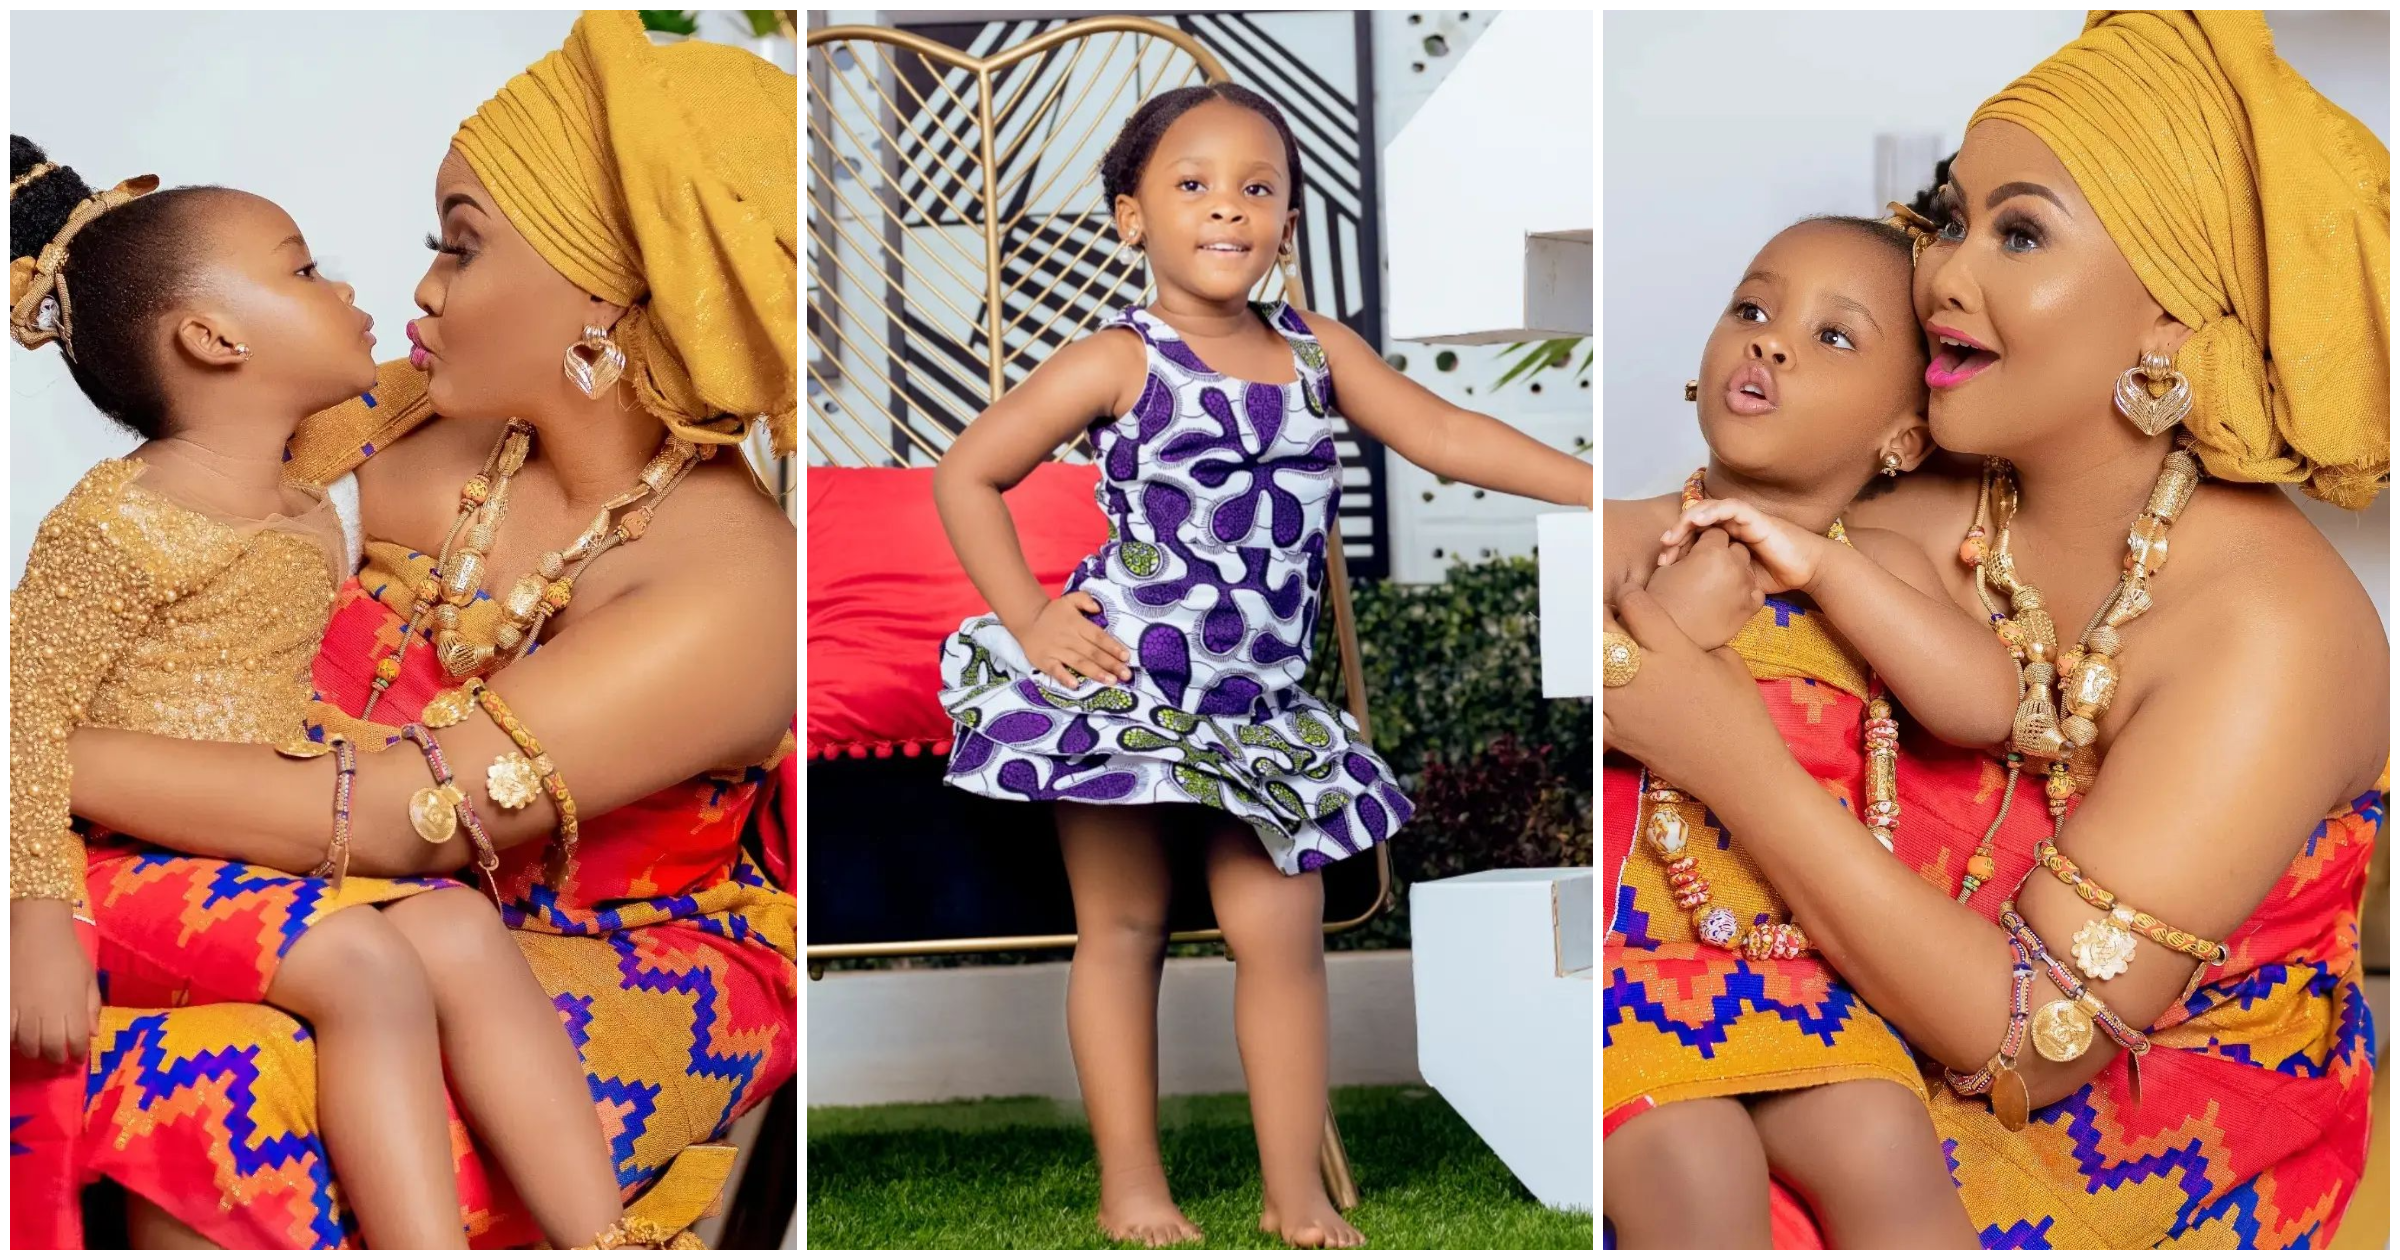 How do you get her to pose beautifully like this? - Latest birthday photos of McBrown's daughter posing like an adult awes fans